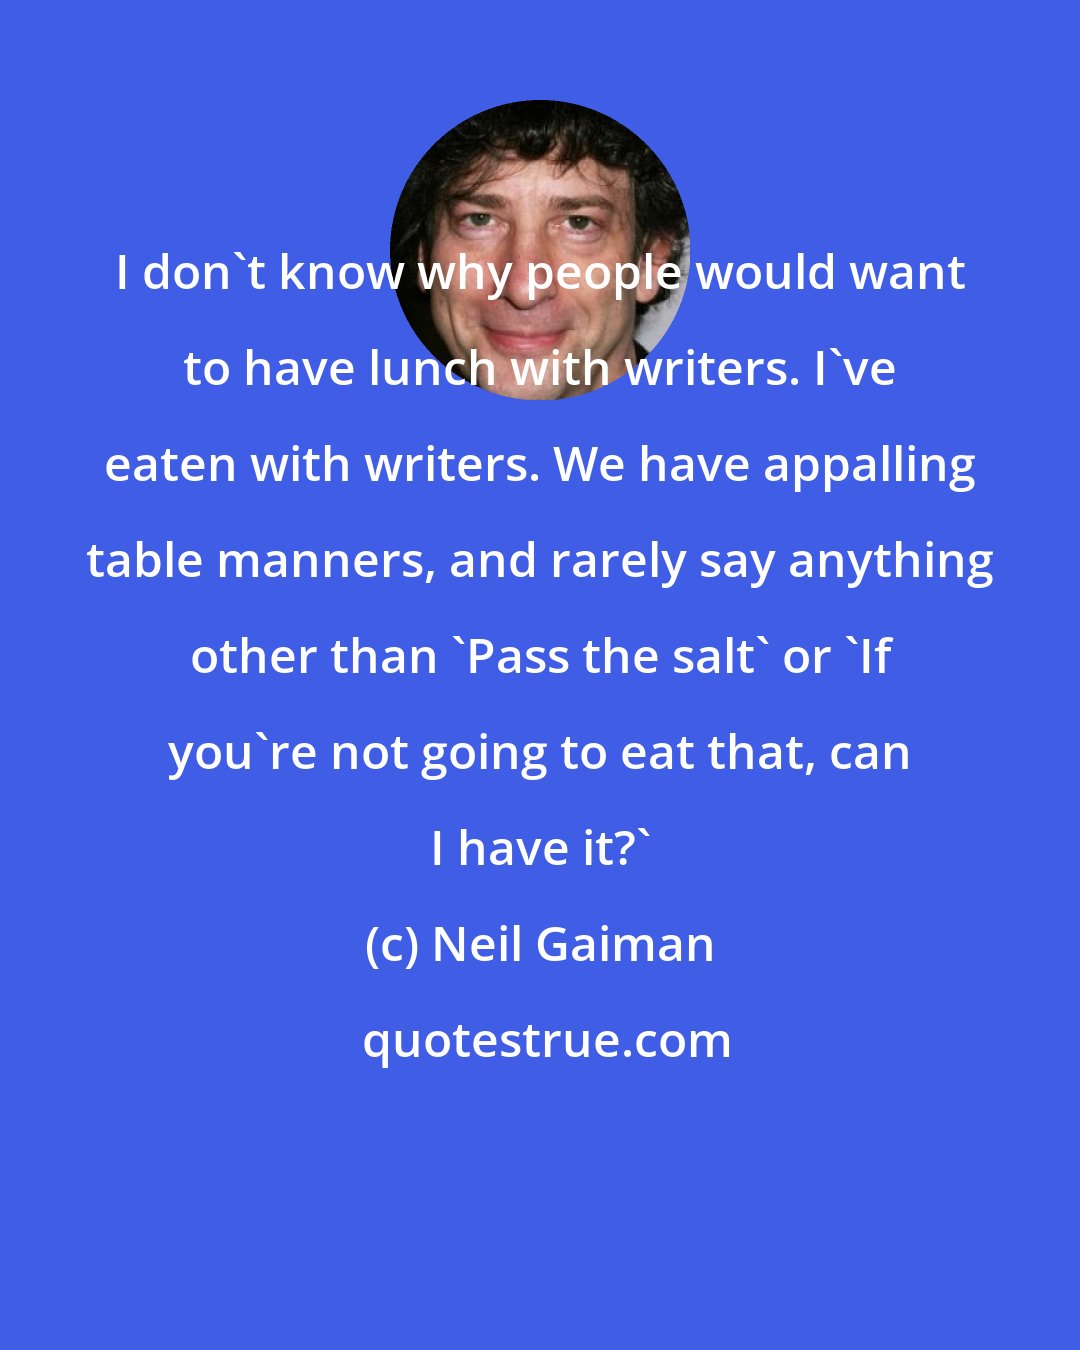 Neil Gaiman: I don't know why people would want to have lunch with writers. I've eaten with writers. We have appalling table manners, and rarely say anything other than 'Pass the salt' or 'If you're not going to eat that, can I have it?'